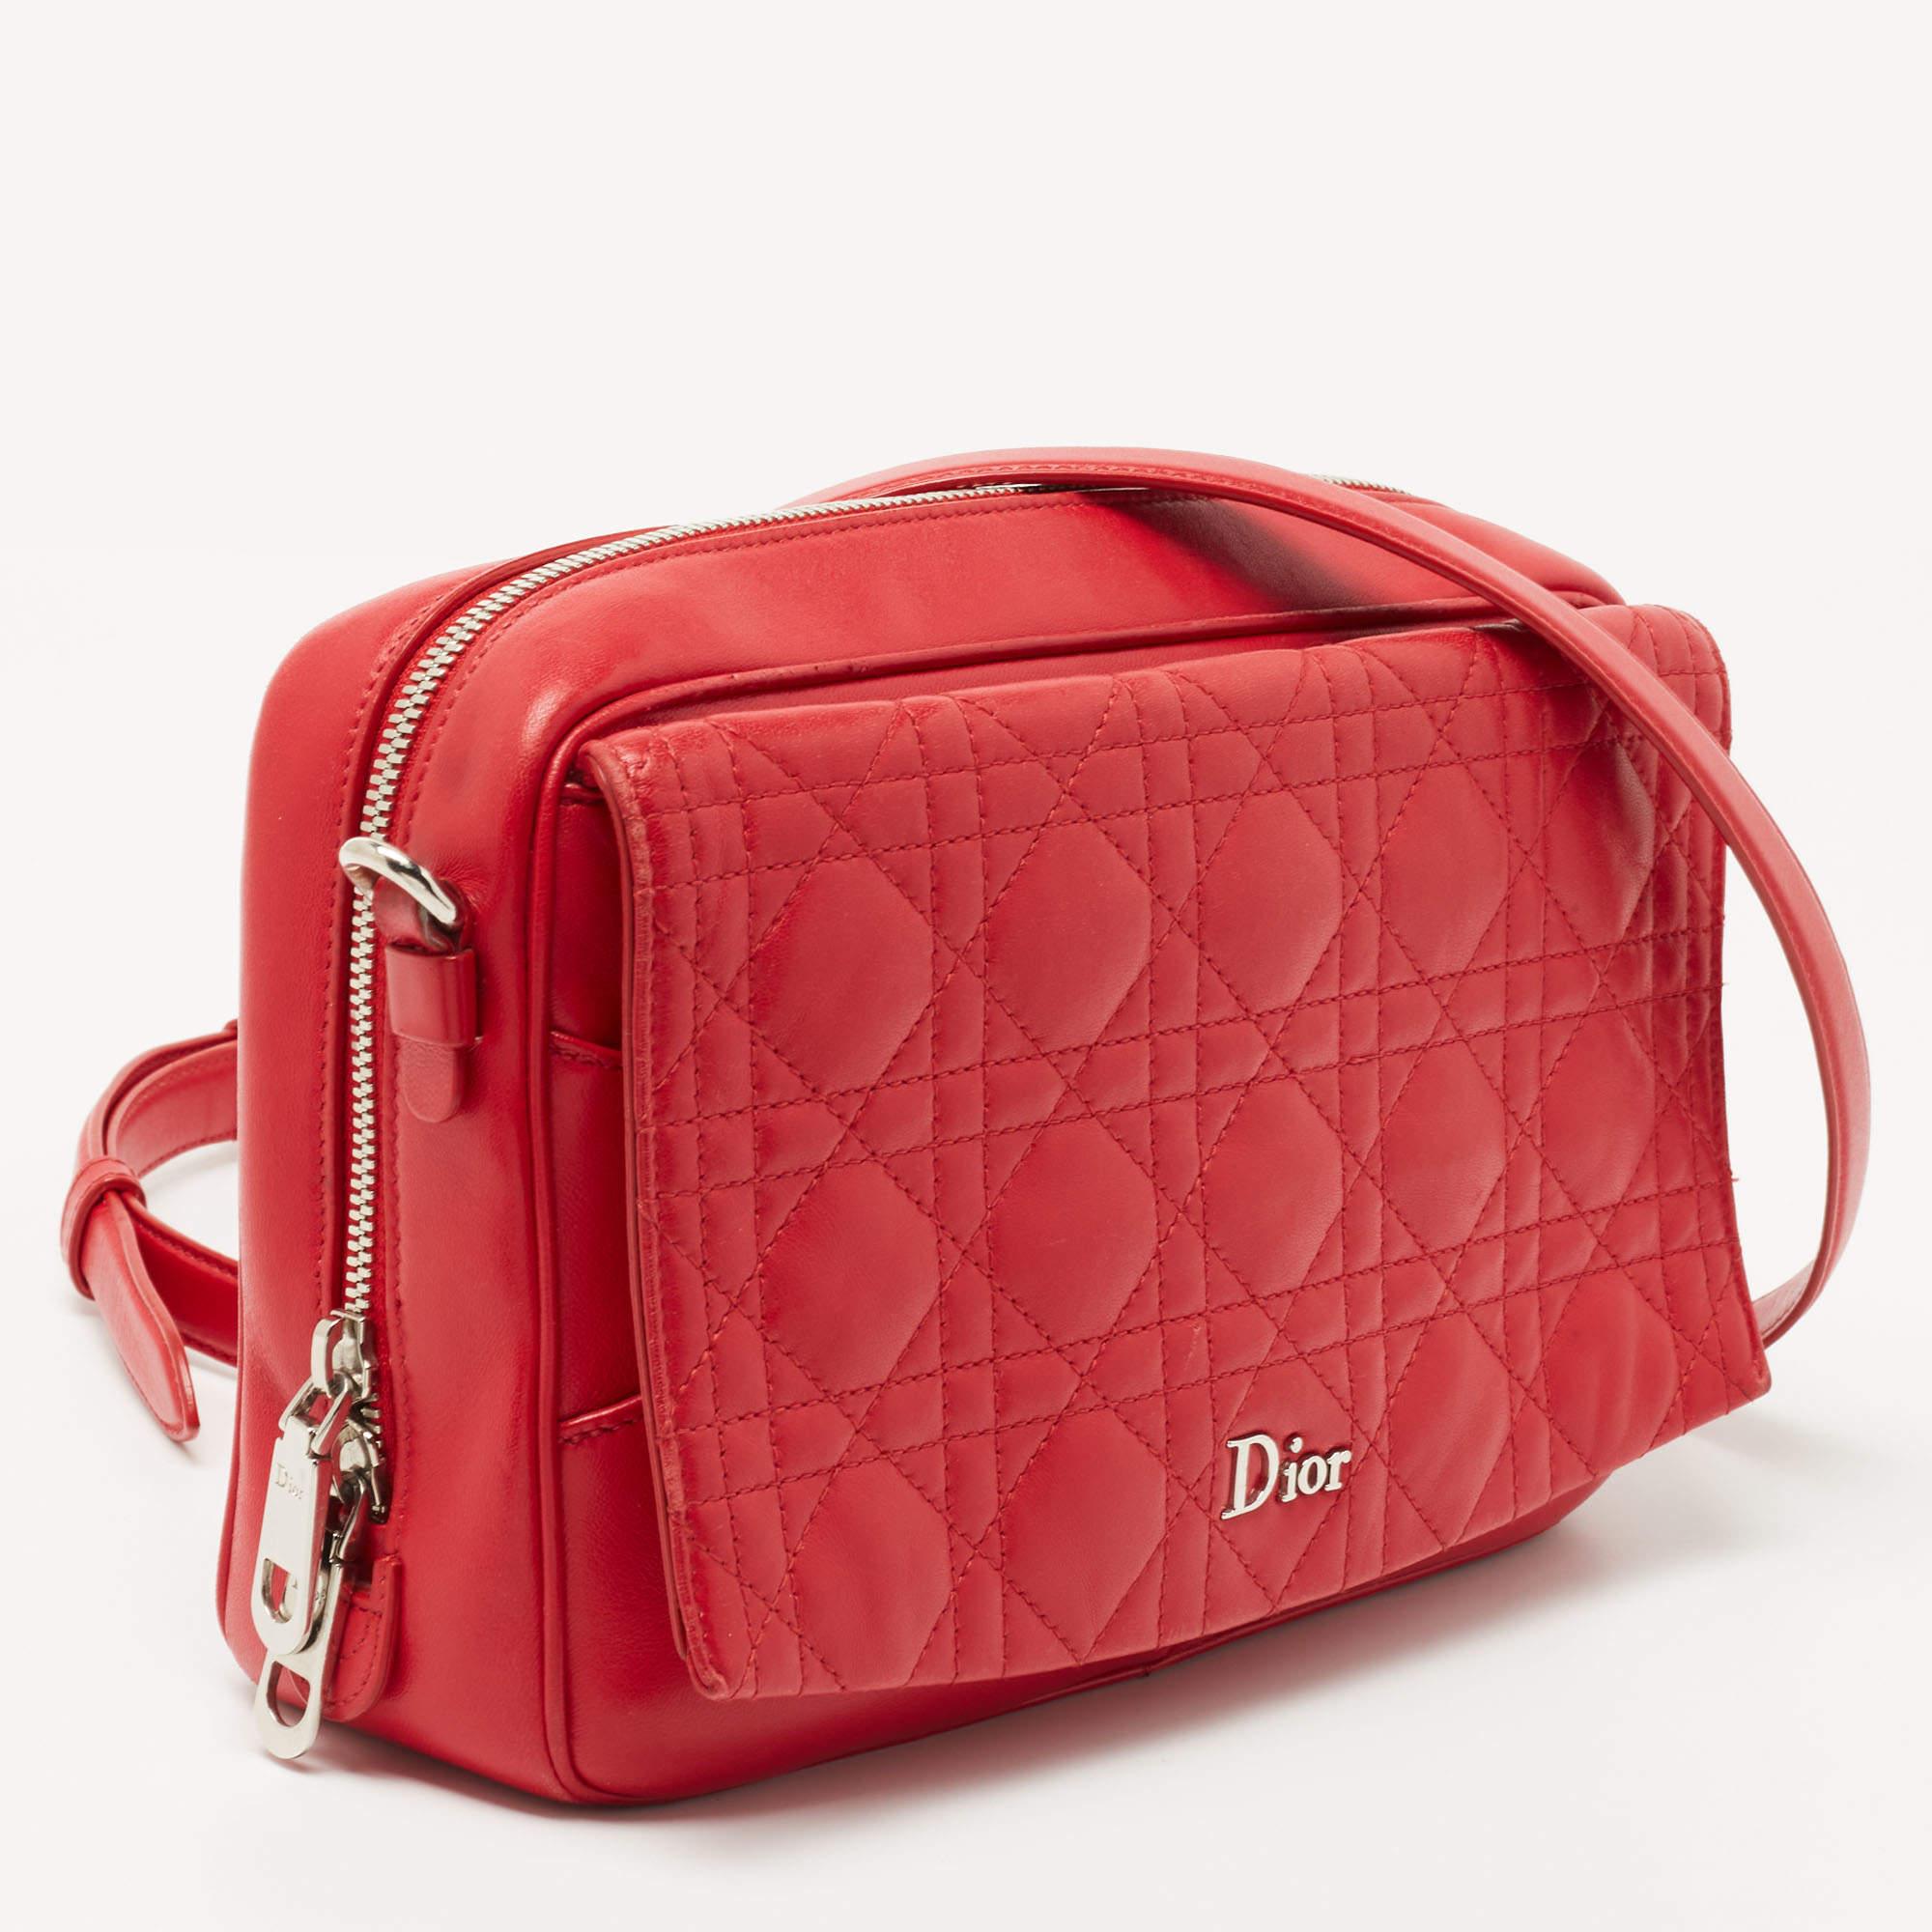 Women's Dior Red Cannage Leather Flap Camera Shoulder Bag